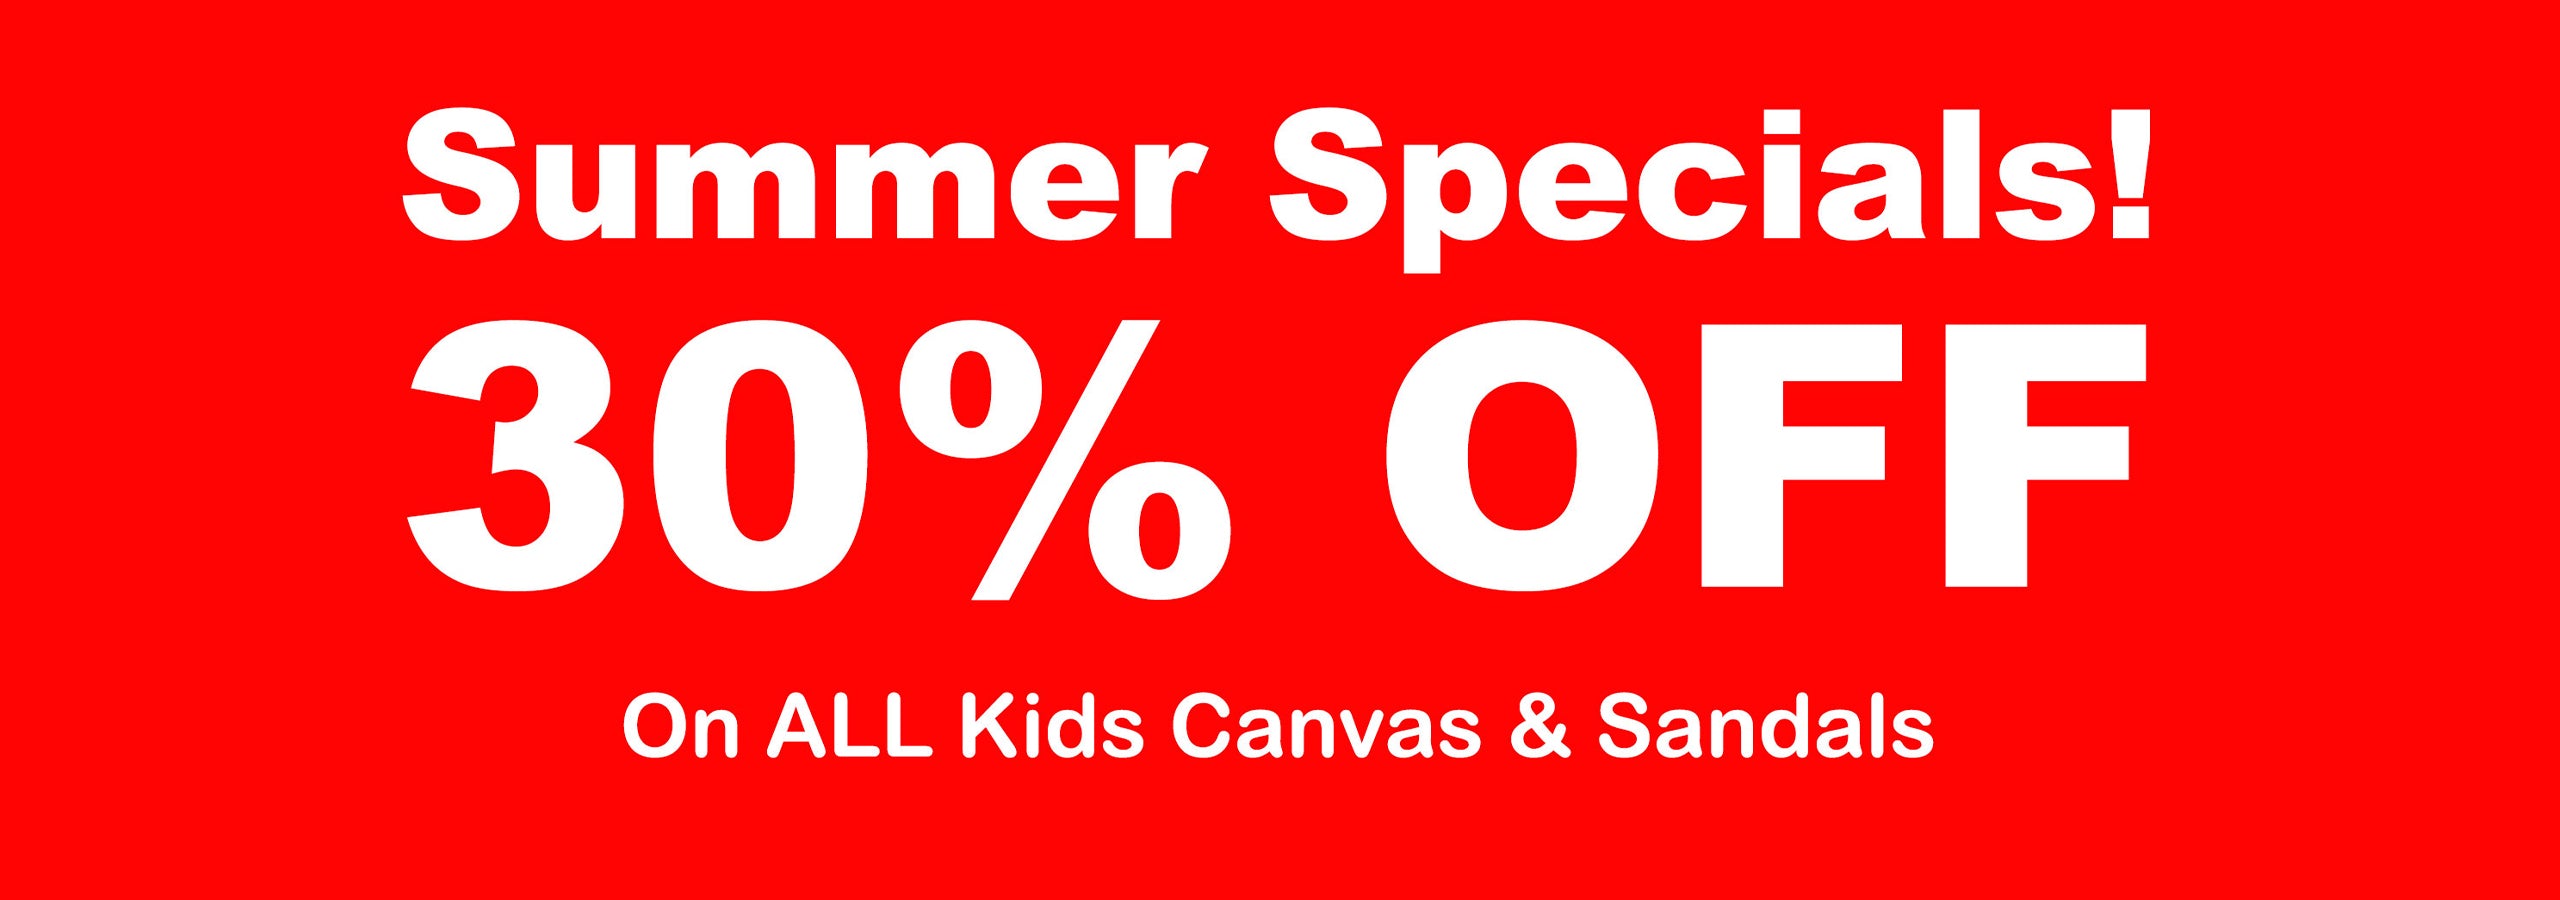 Summer specials 30% off on all kids' canvas and sandals